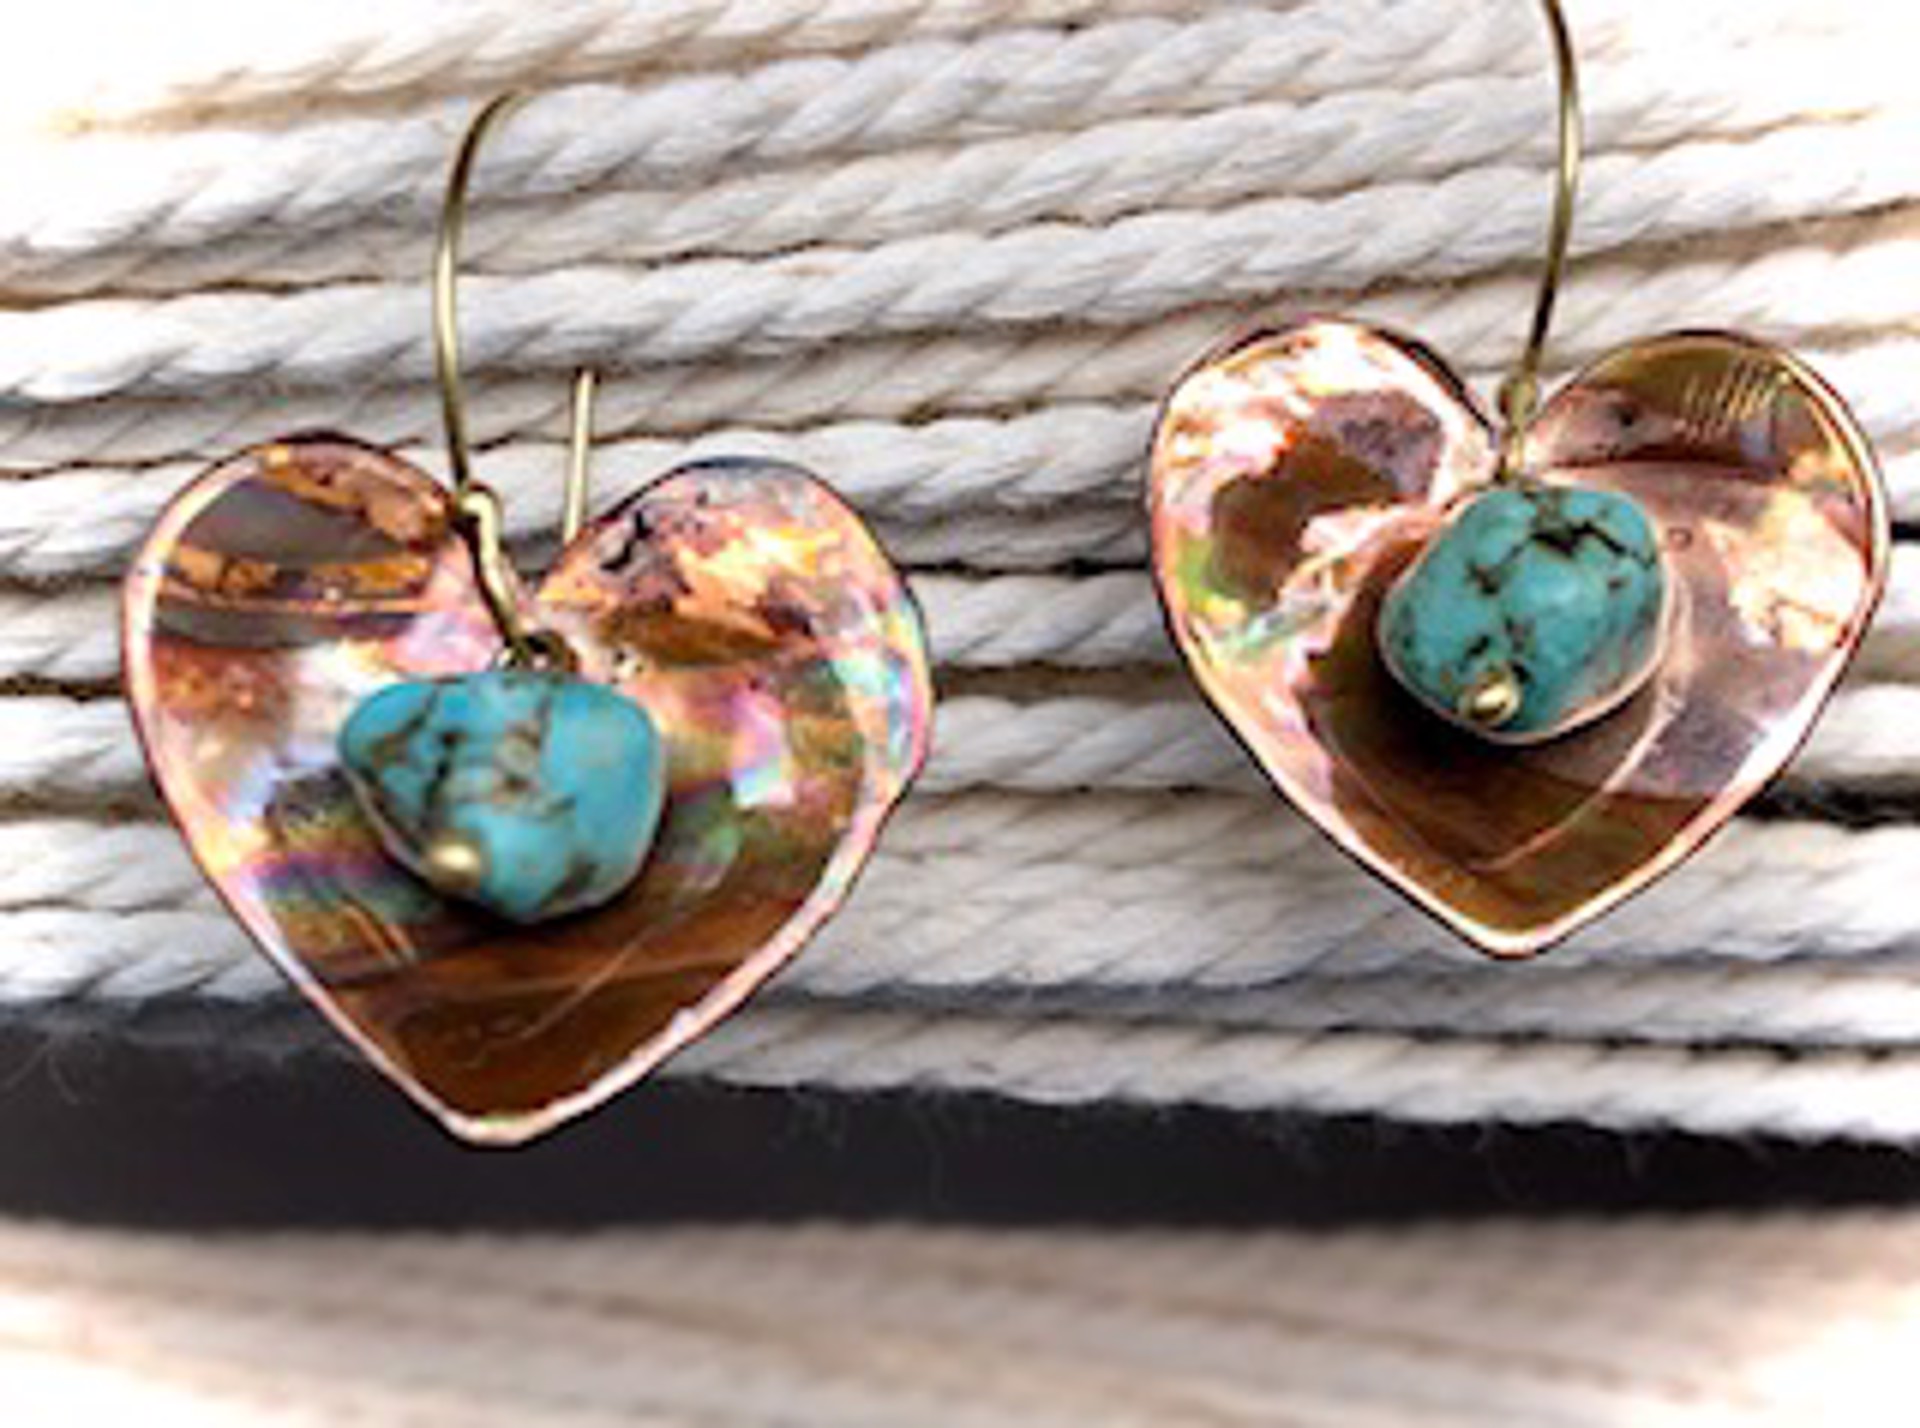 Earrings - CopperHearts With Turquoise - #1019 by Vesta Abel